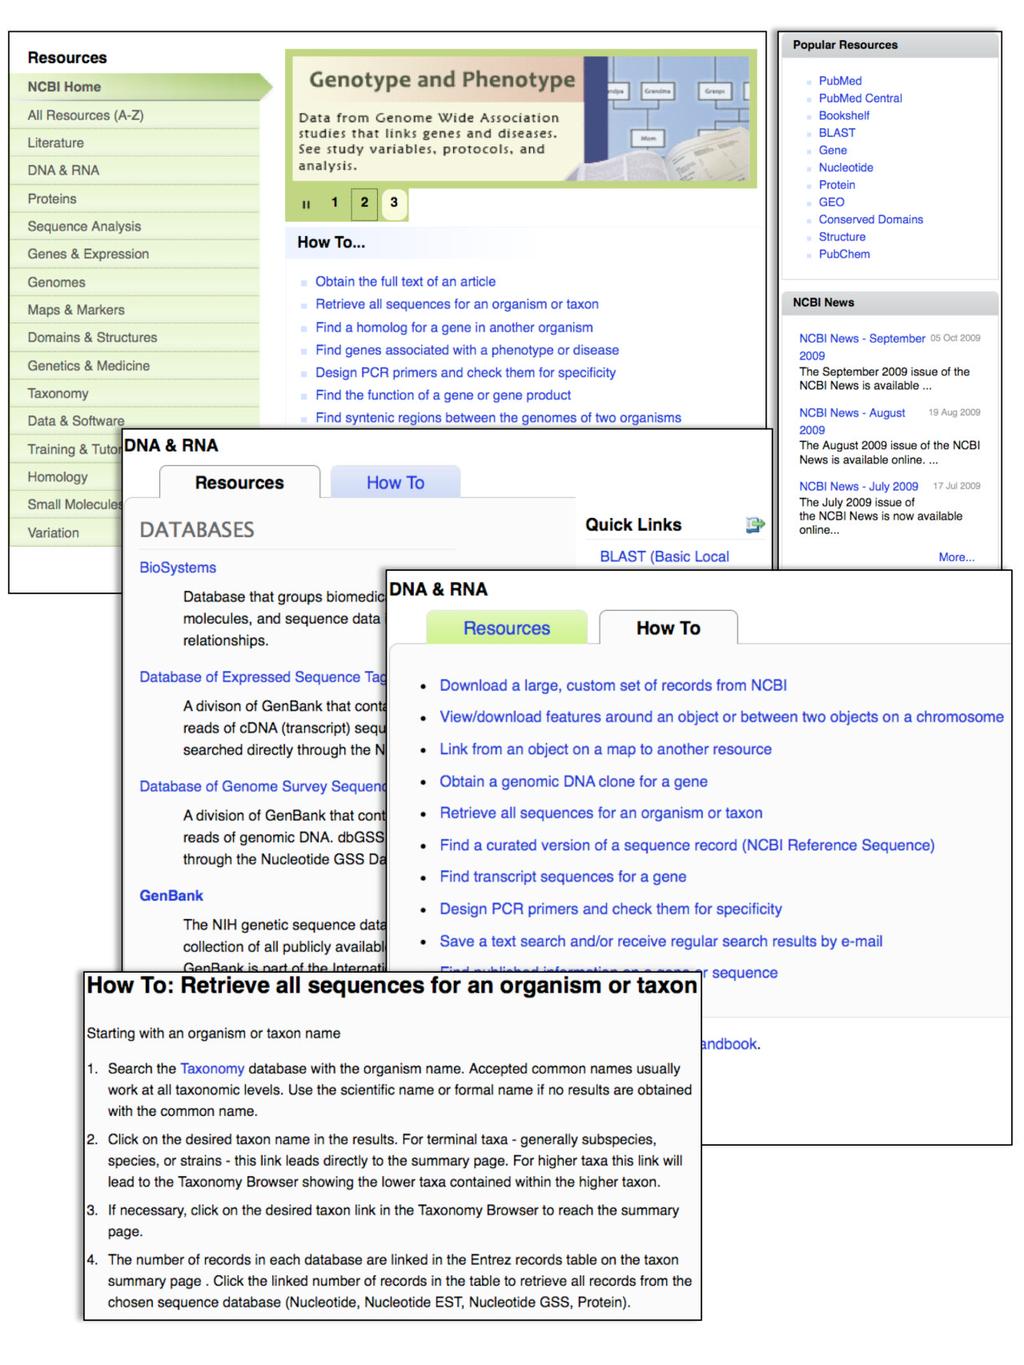 Page 7 Figure 1. The new NCBI Site Guide that is now the Homepage featuring Resource categories and How To lists.